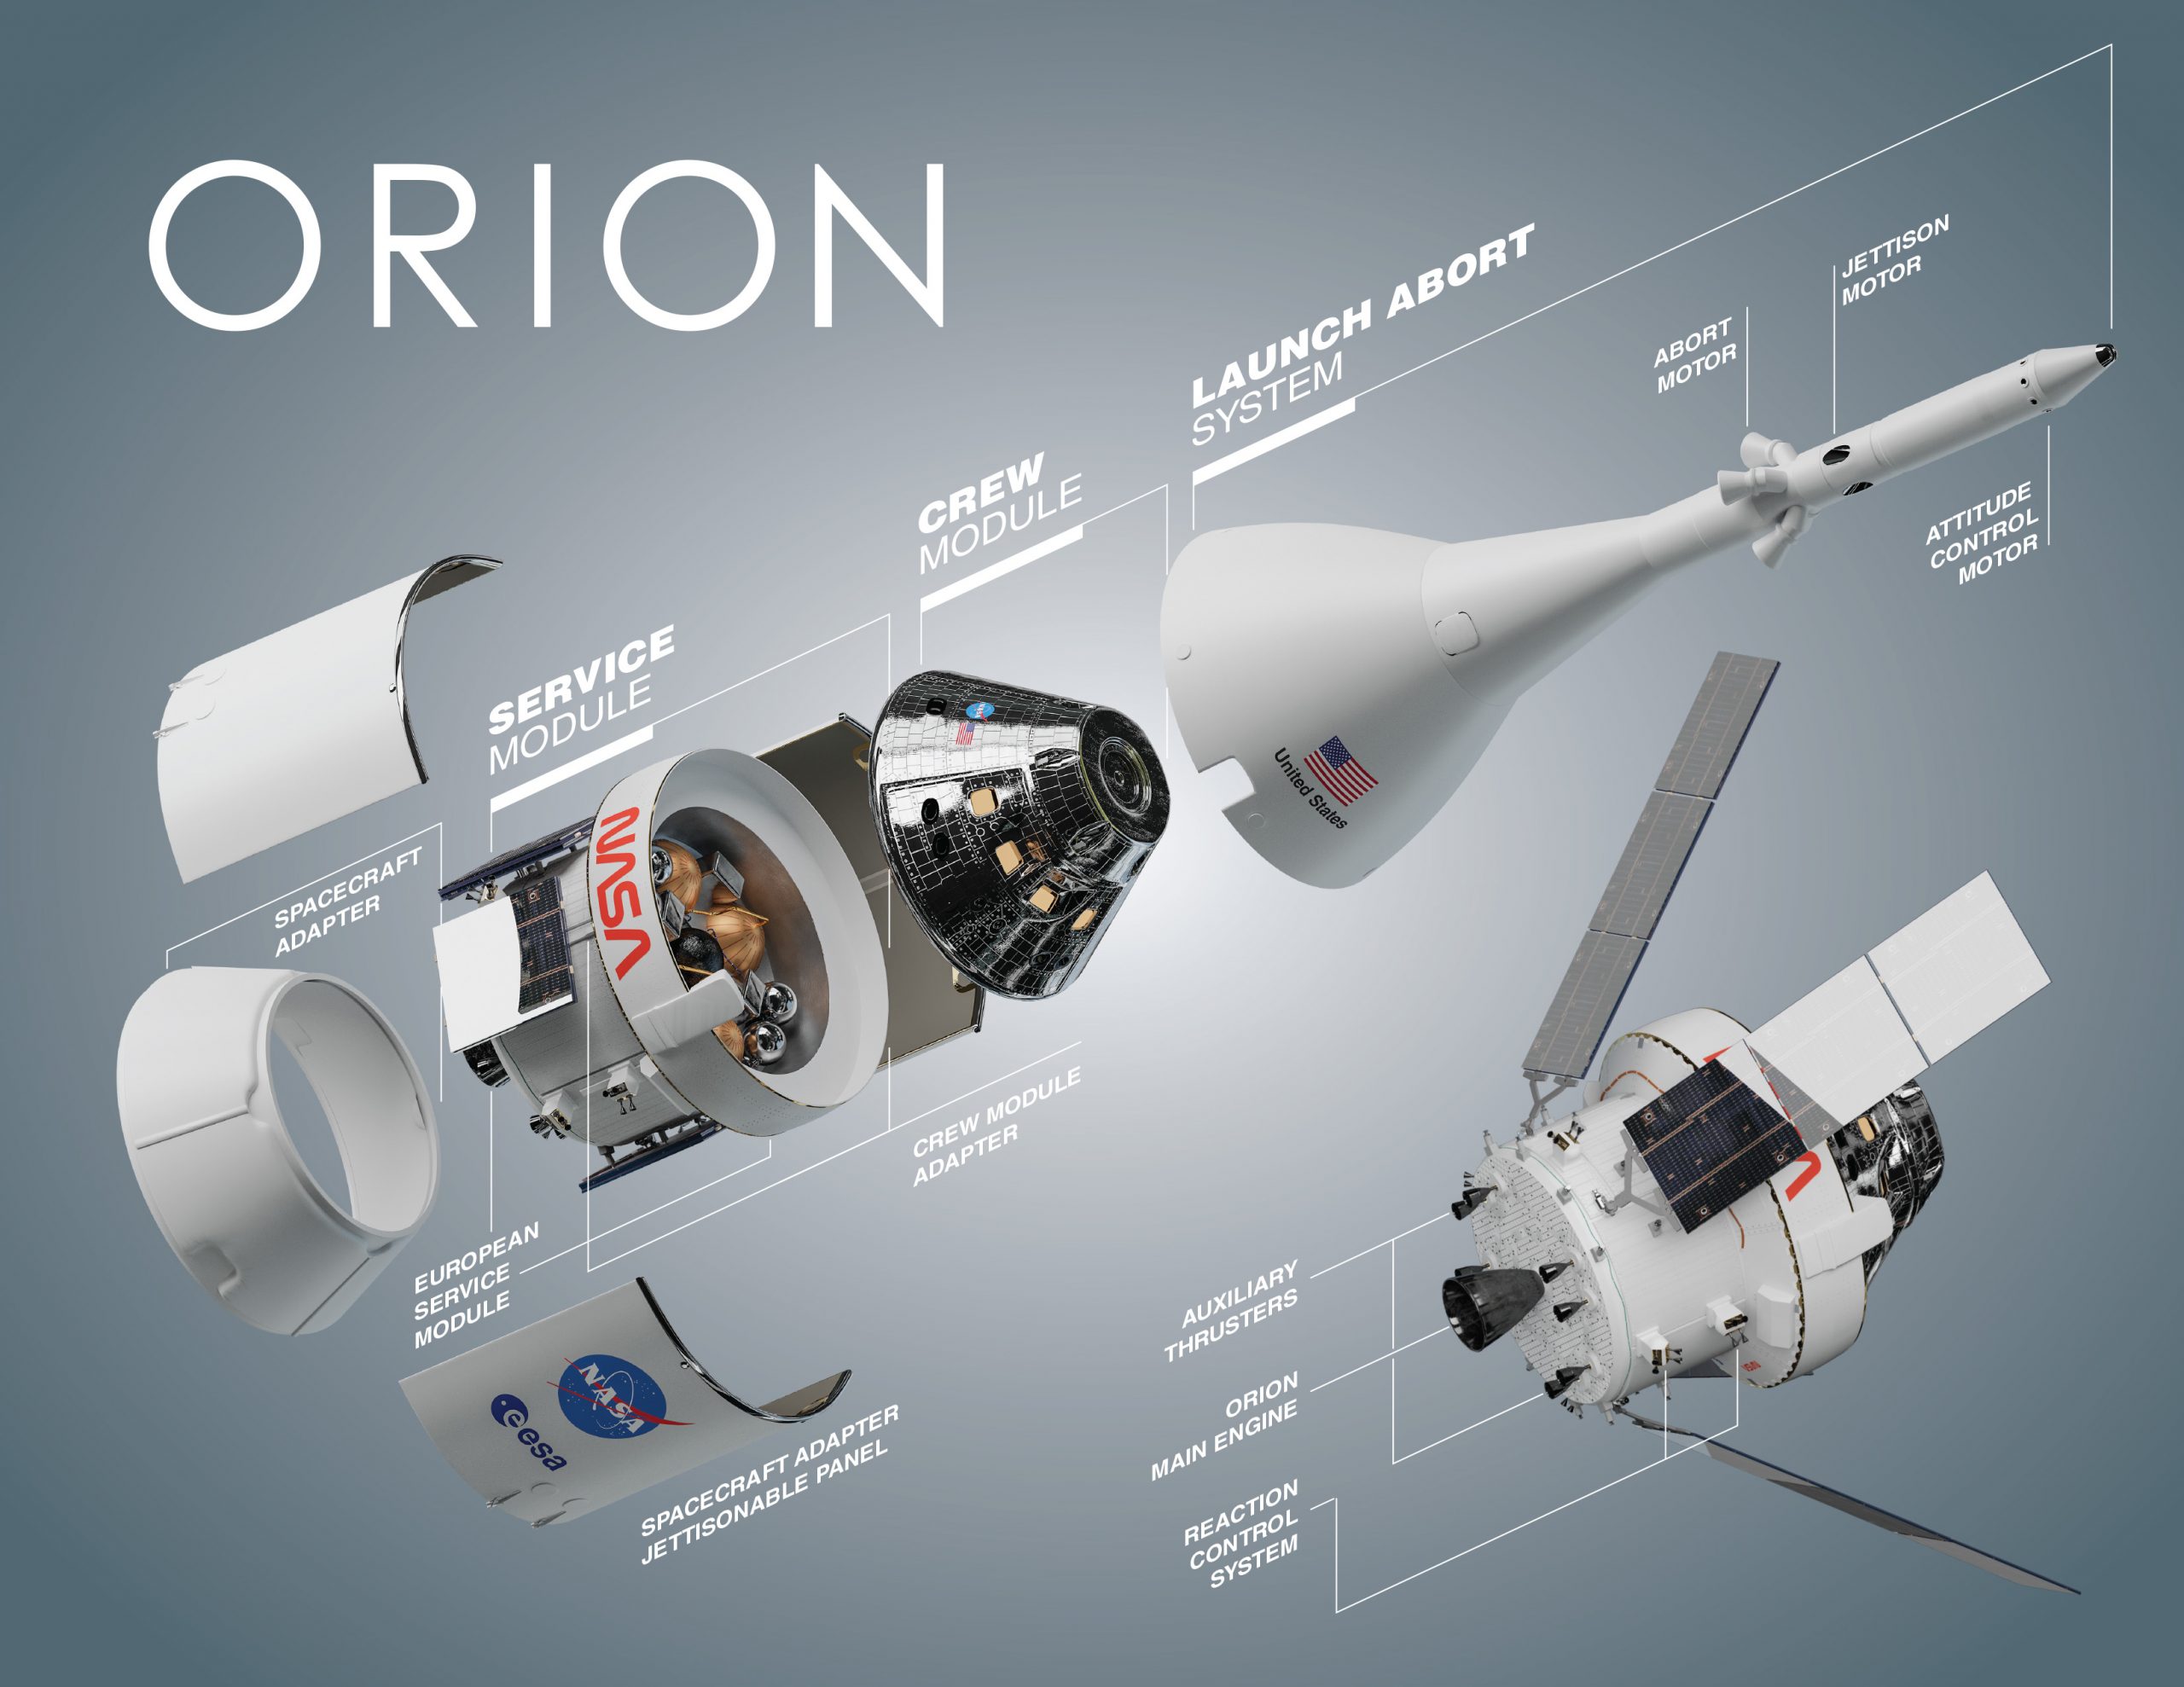 NASA Releases its Reference Guide for the Artemis Mission’s Orion Spacecraft